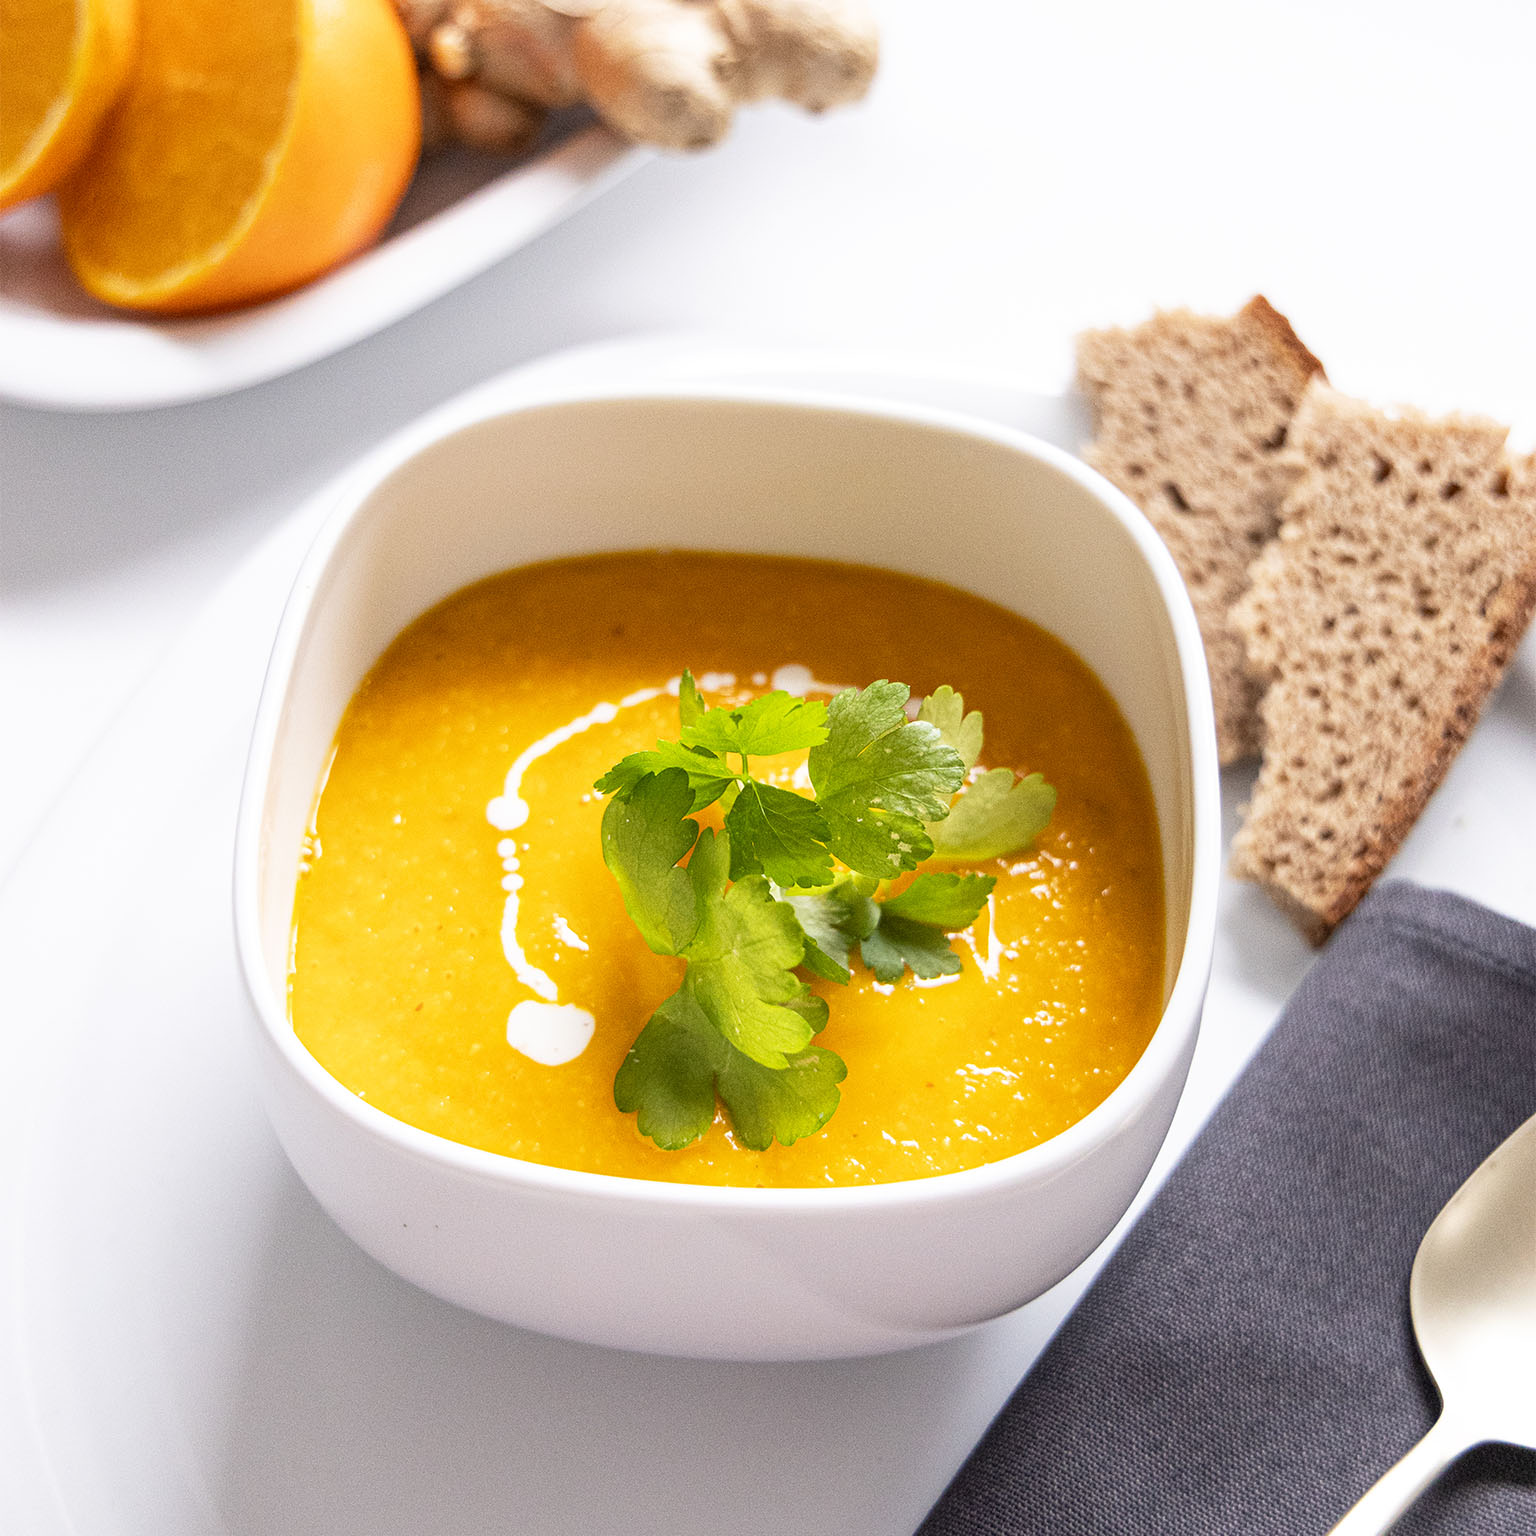 Rosenthal Suomi soup bowl filled with pumpkin soup